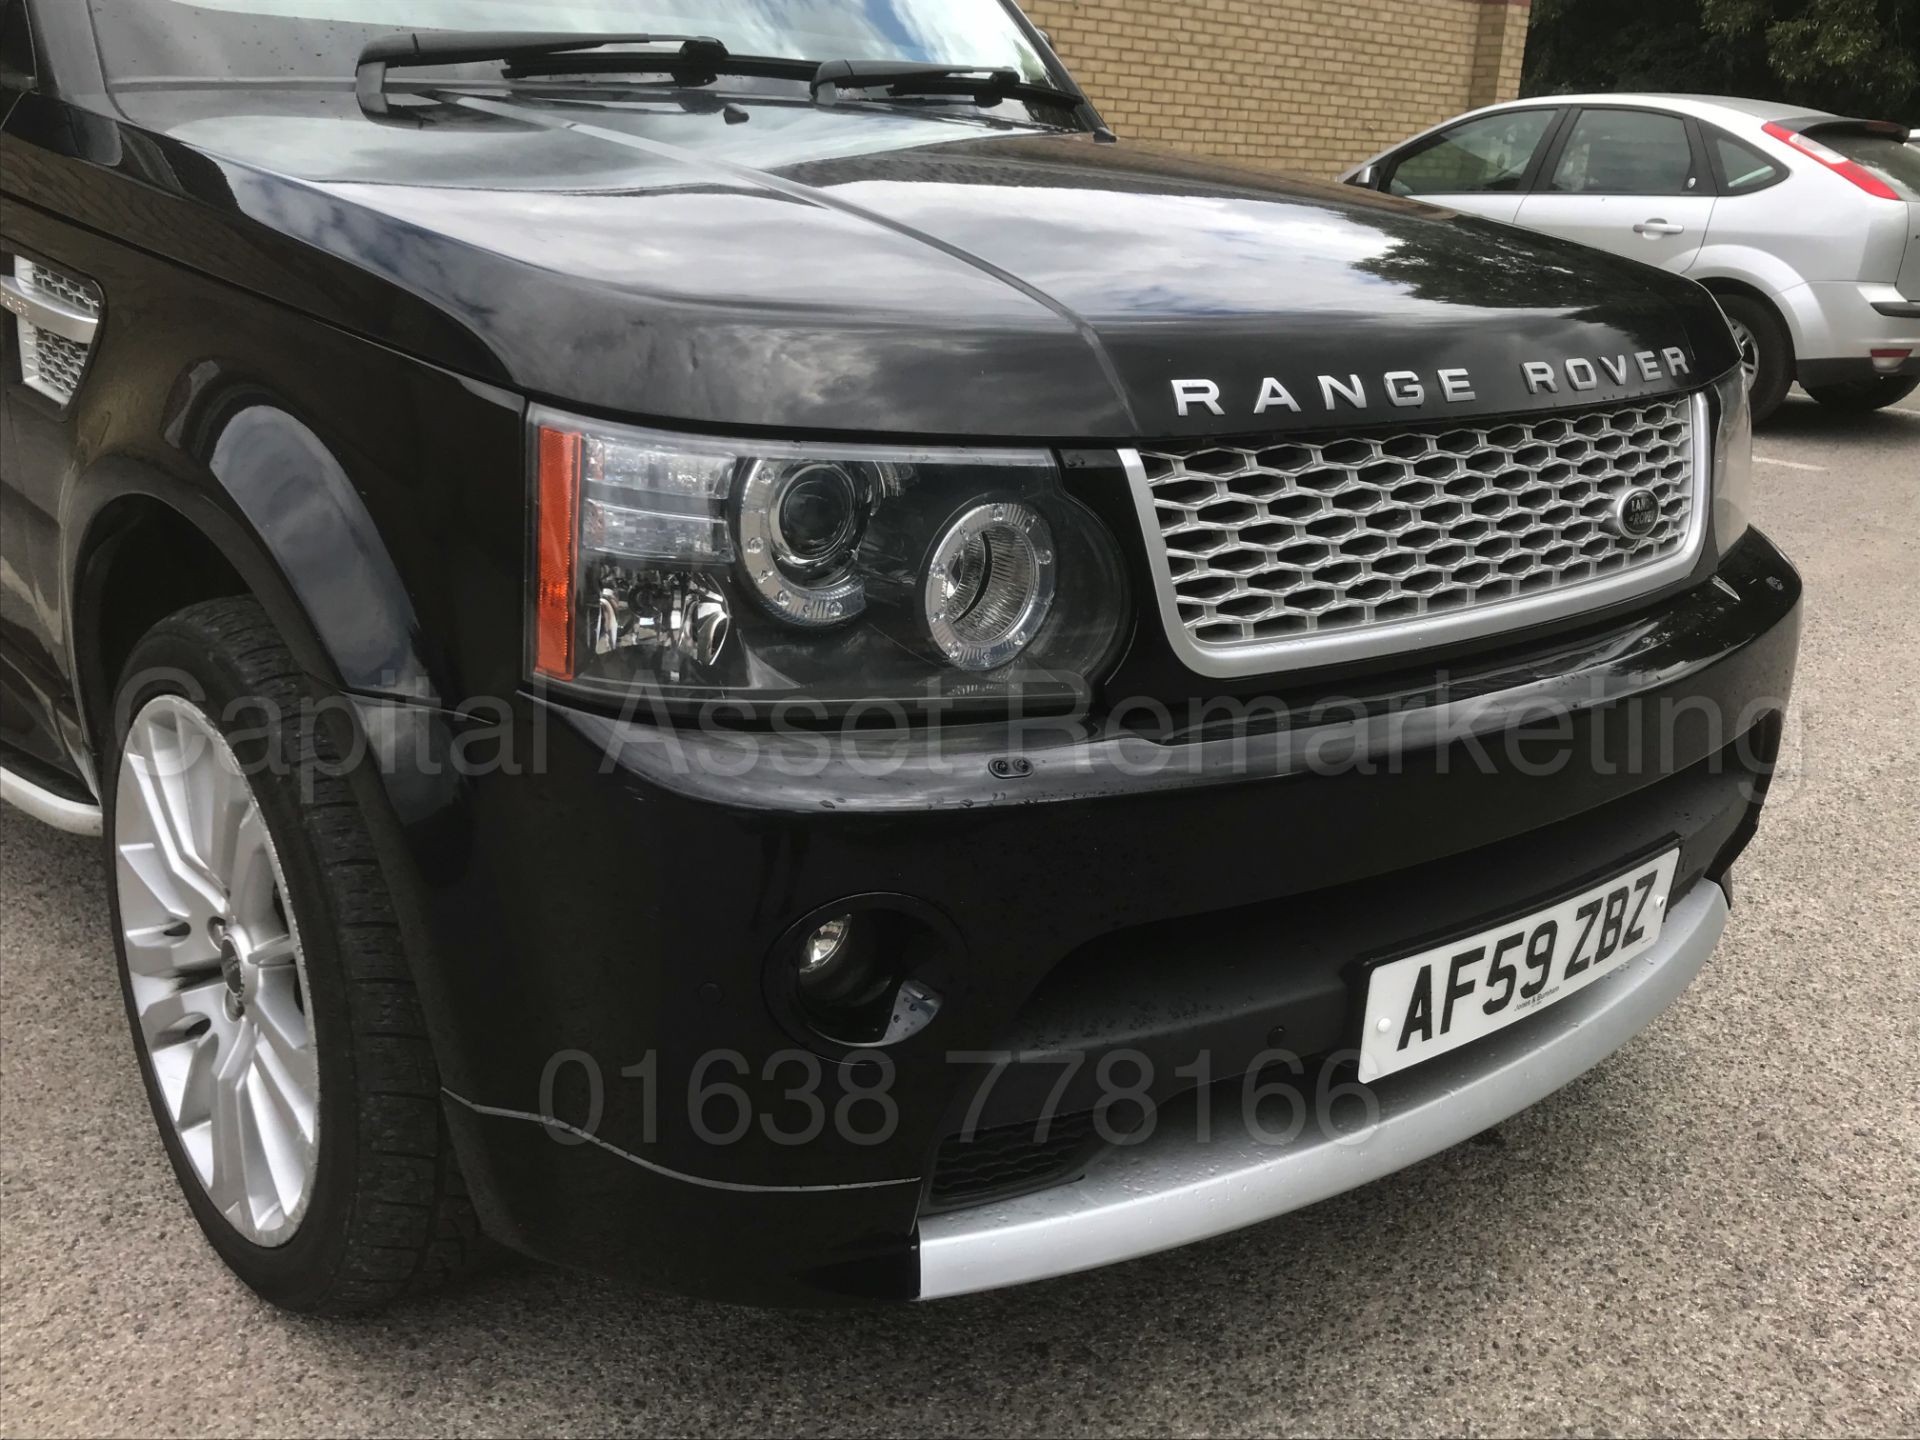 (On Sale) RANGE ROVER SPORT *HSE EDITION* (2010 MODEL) '3.0 TDV6 - 245 BHP - AUTO' **FULLY LOADED** - Image 13 of 44